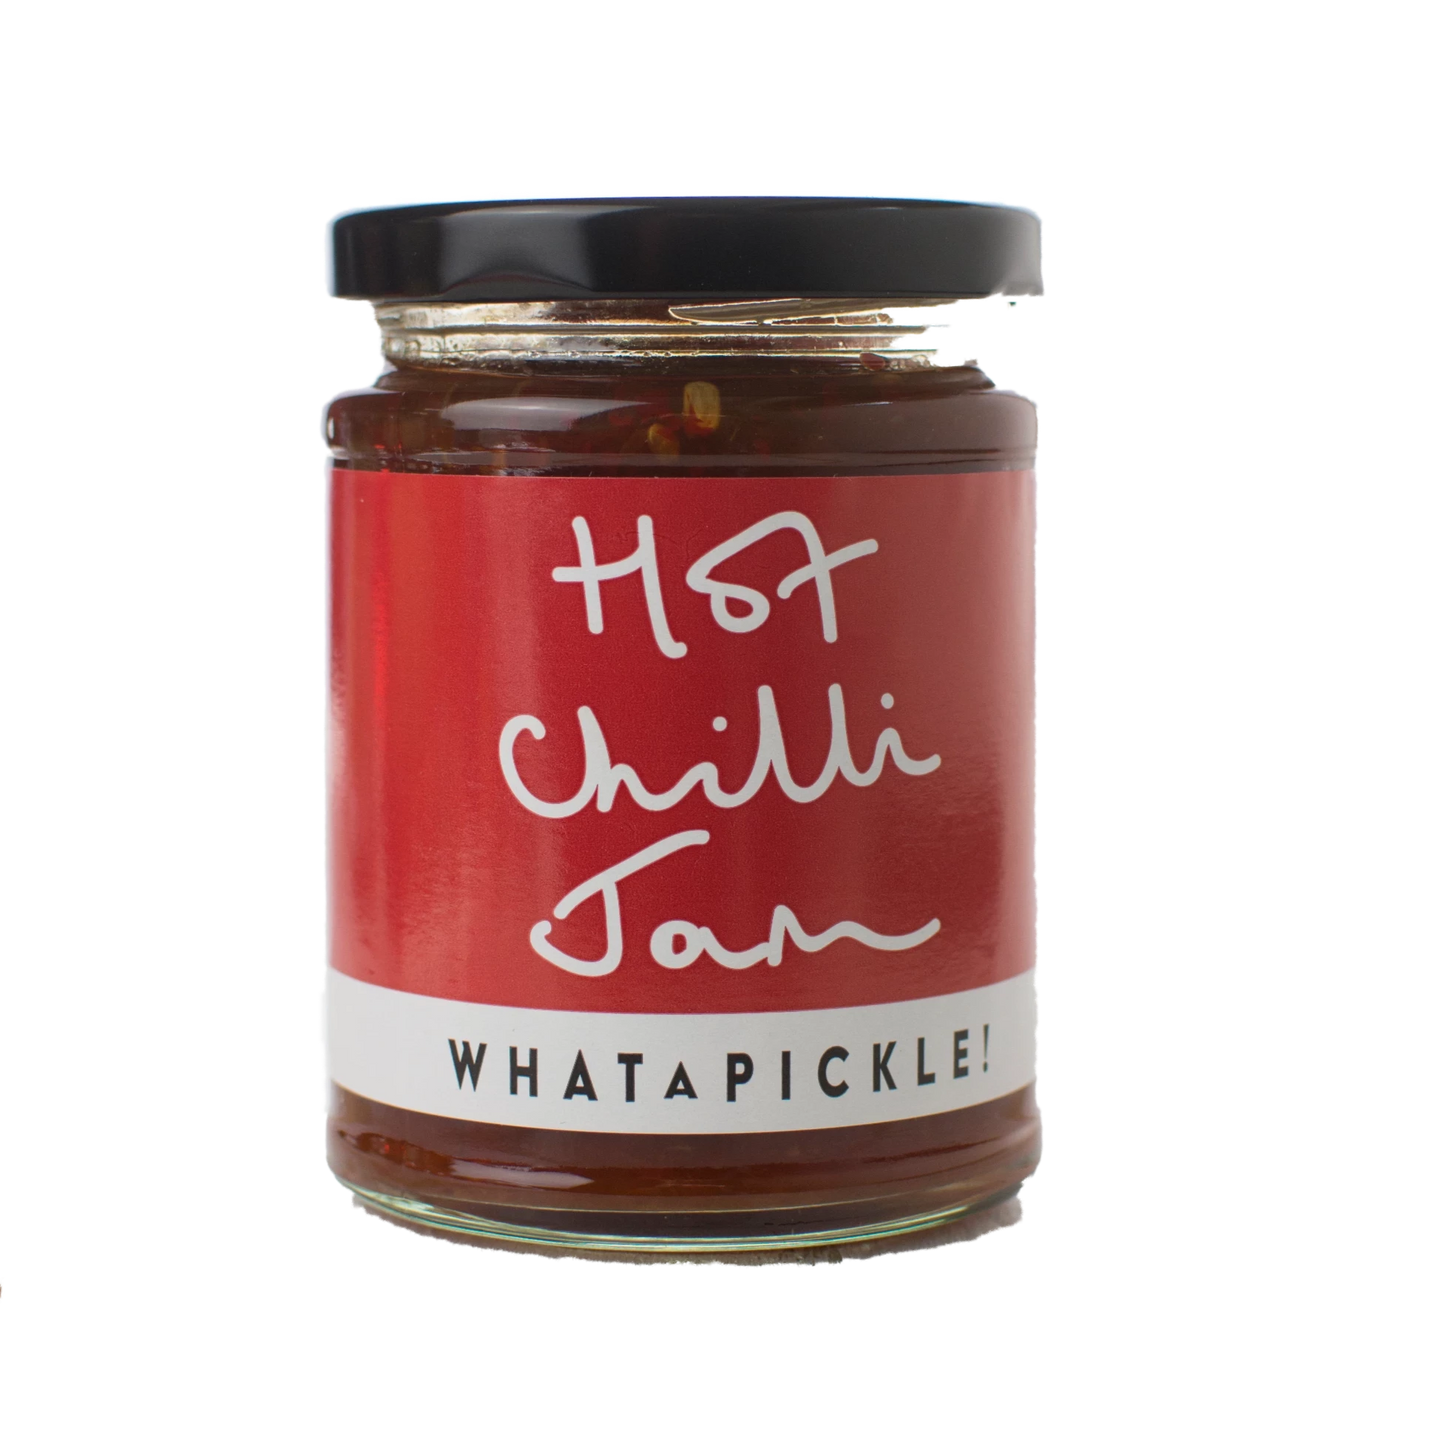 What A Pickle! - Hot Chilli Jam 290g